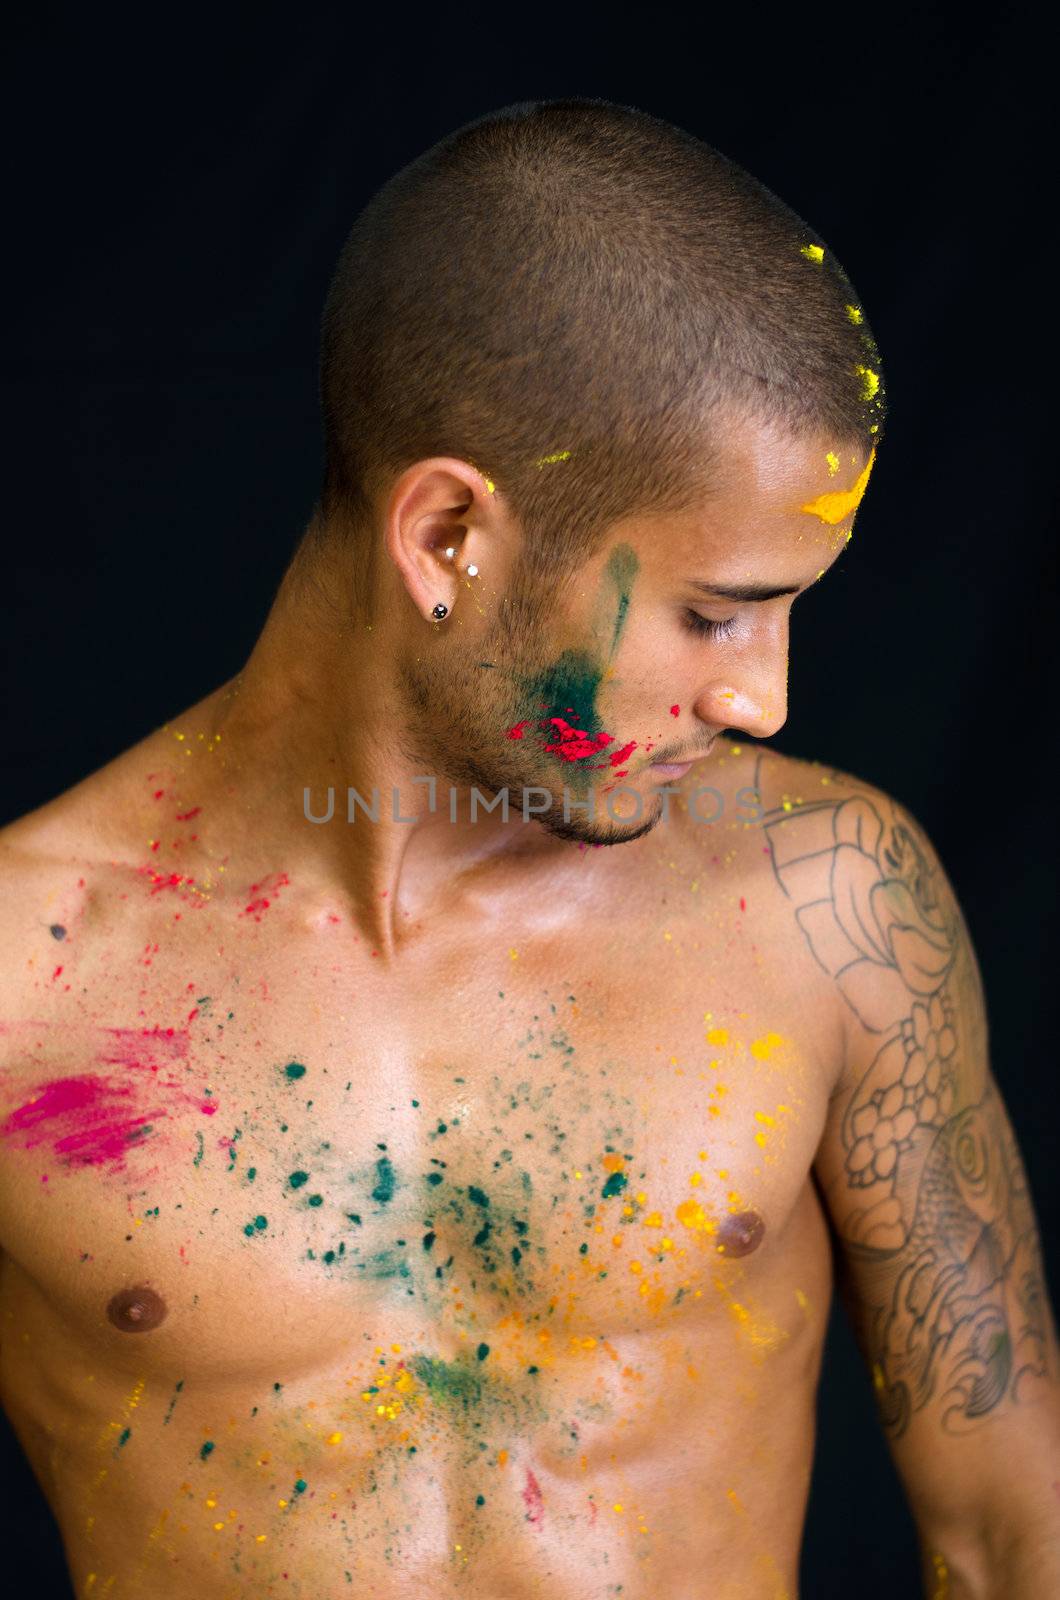 Handsome young man painted and sprayed with Honi color on his skin by artofphoto